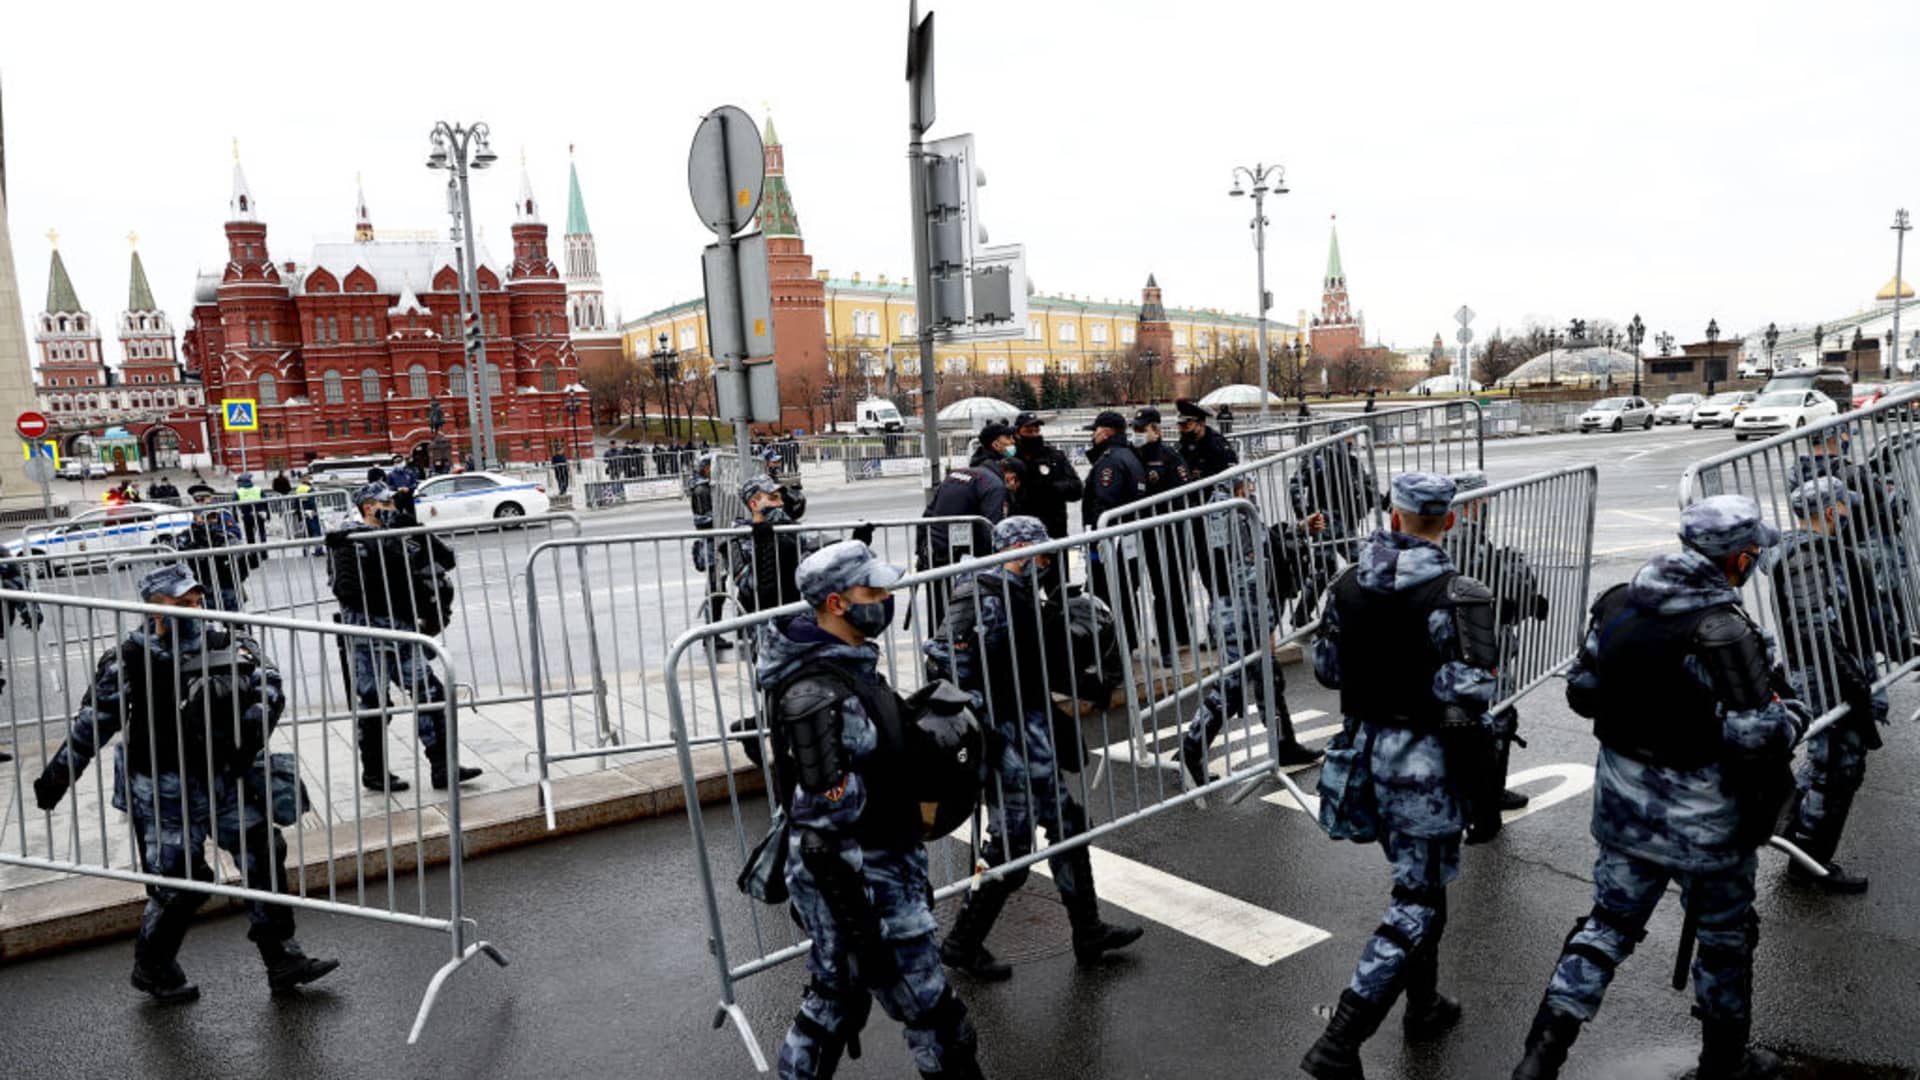 Russian police officers stand guard around the Kremlin Palace and Red Square on April 21, 2021.